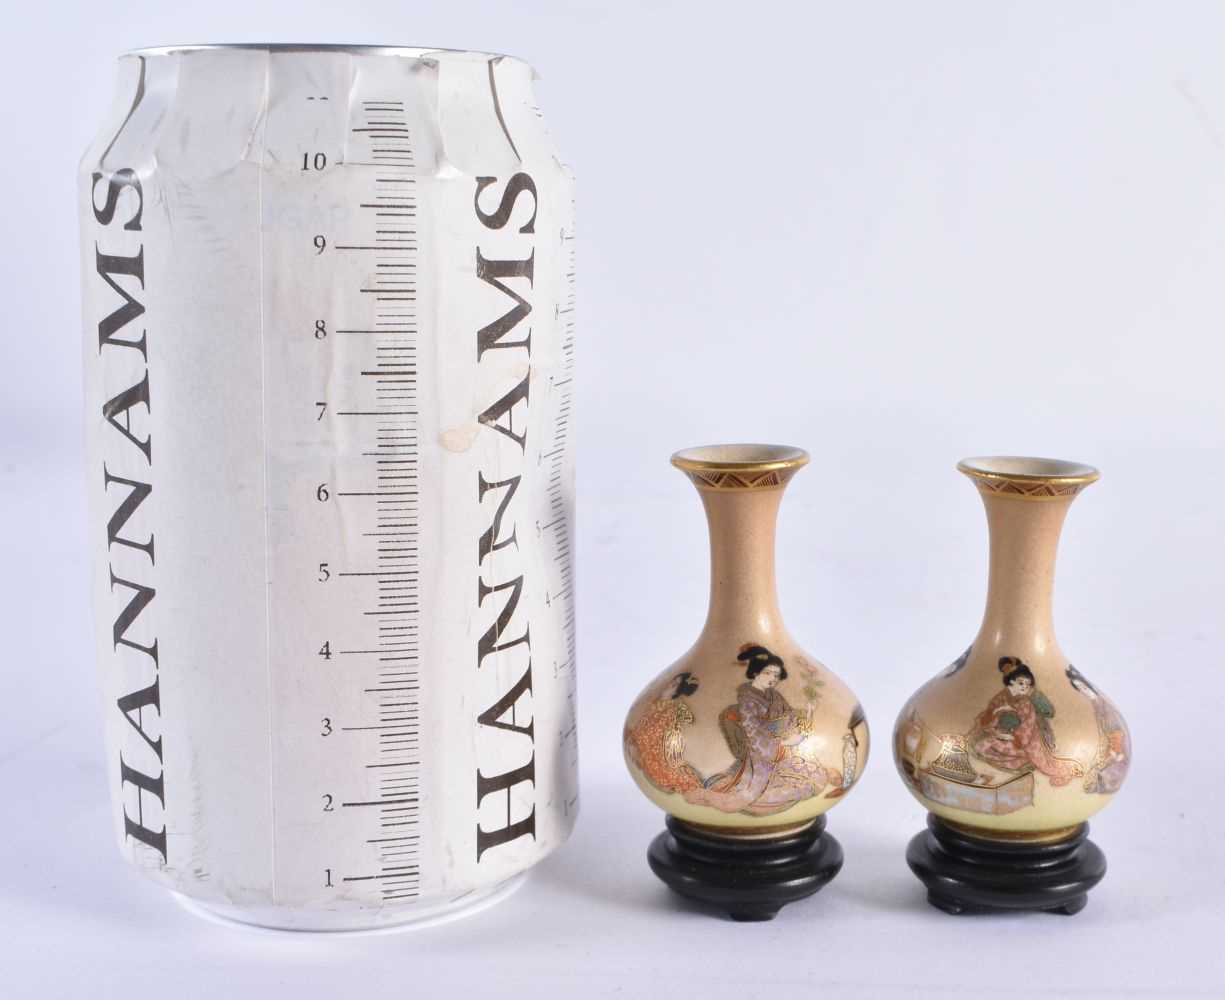 A RARE MINIATURE PAIR OF LATE 19TH CENTURY JAPANESE MEIJI PERIOD SATSUMA VASES painted with